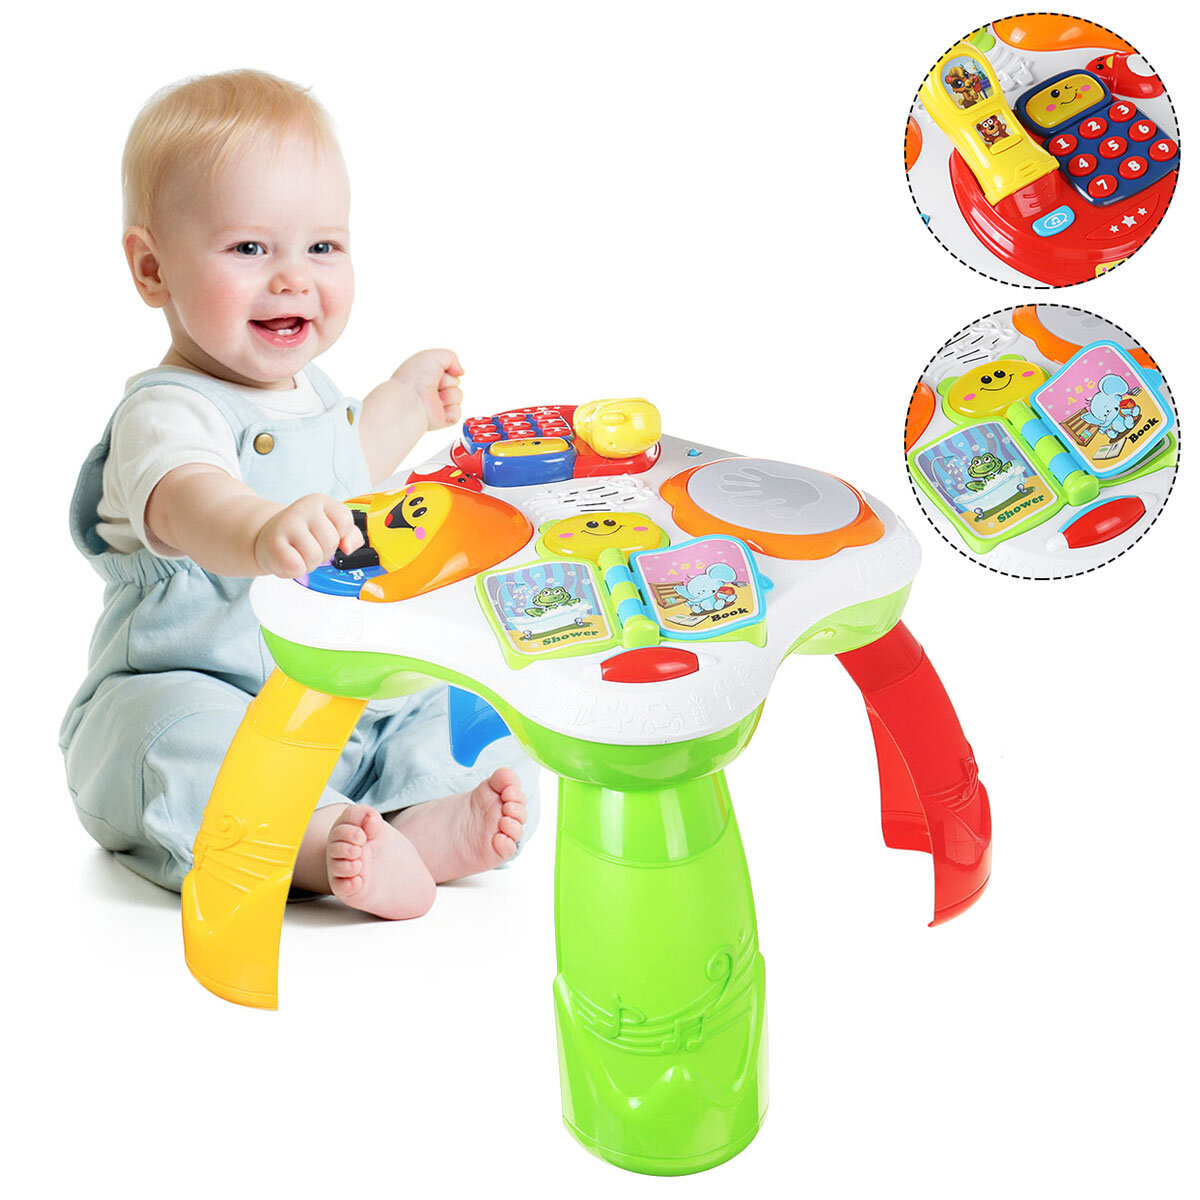 standing activity table for babies